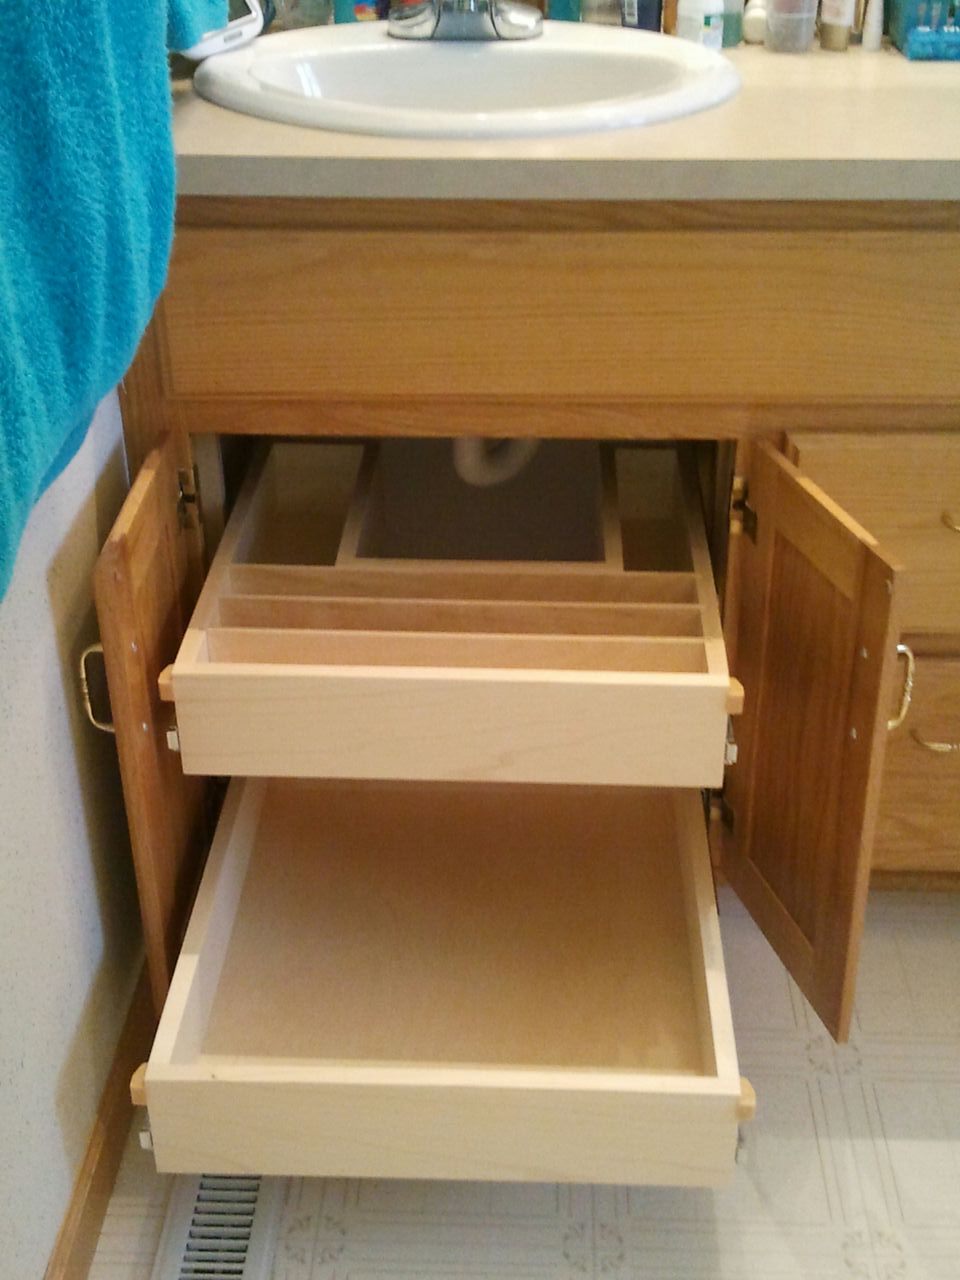 Bathroom Cabinet Roll Out Shelves, Pull Out Drawers For Bathroom Vanity